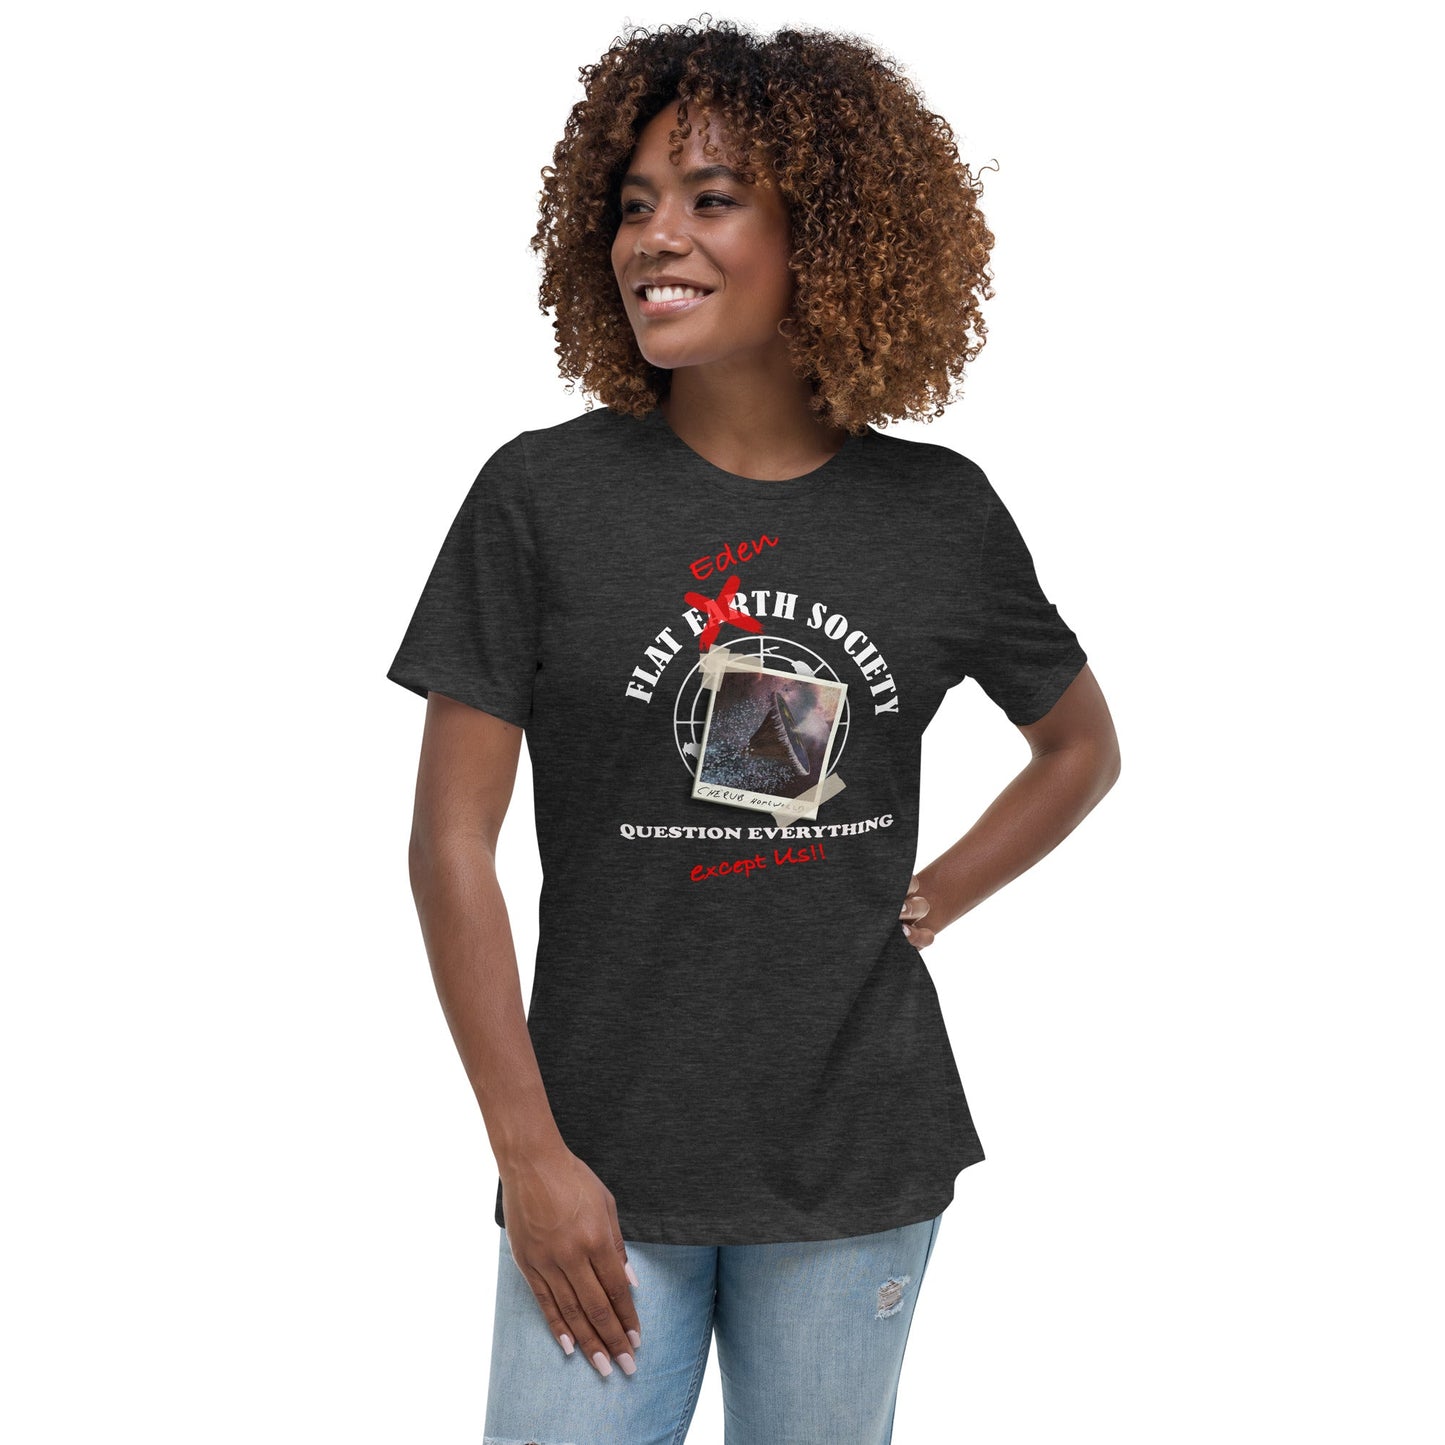 Women's Relaxed T-Shirt | Intergalactic Space Force | Flat Eden Society - Spectral Ink Shop - Shirts & Tops -7596367_10193